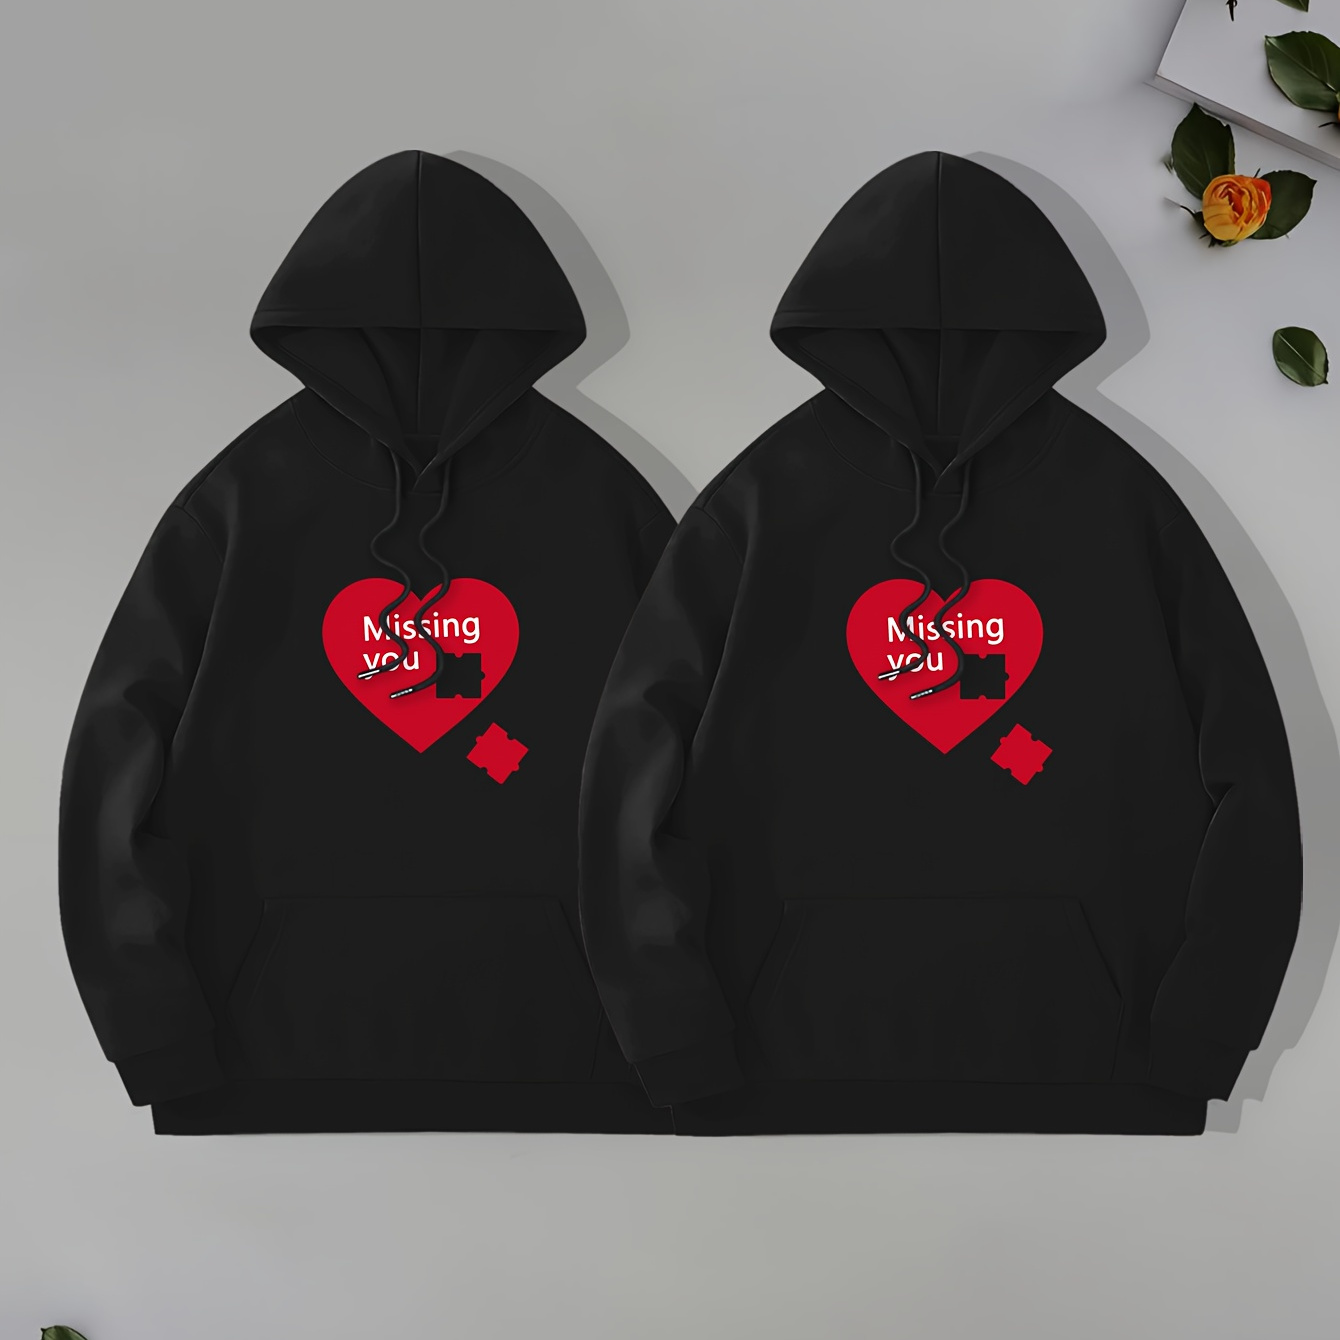 

Hearts Print Lovers Pullover Round Neck Hoodies With Kangaroo Pocket Long Sleeve Hooded Sweatshirt Loose Casual Top For Autumn Winter Men's Clothing As Gifts Valentine's Day